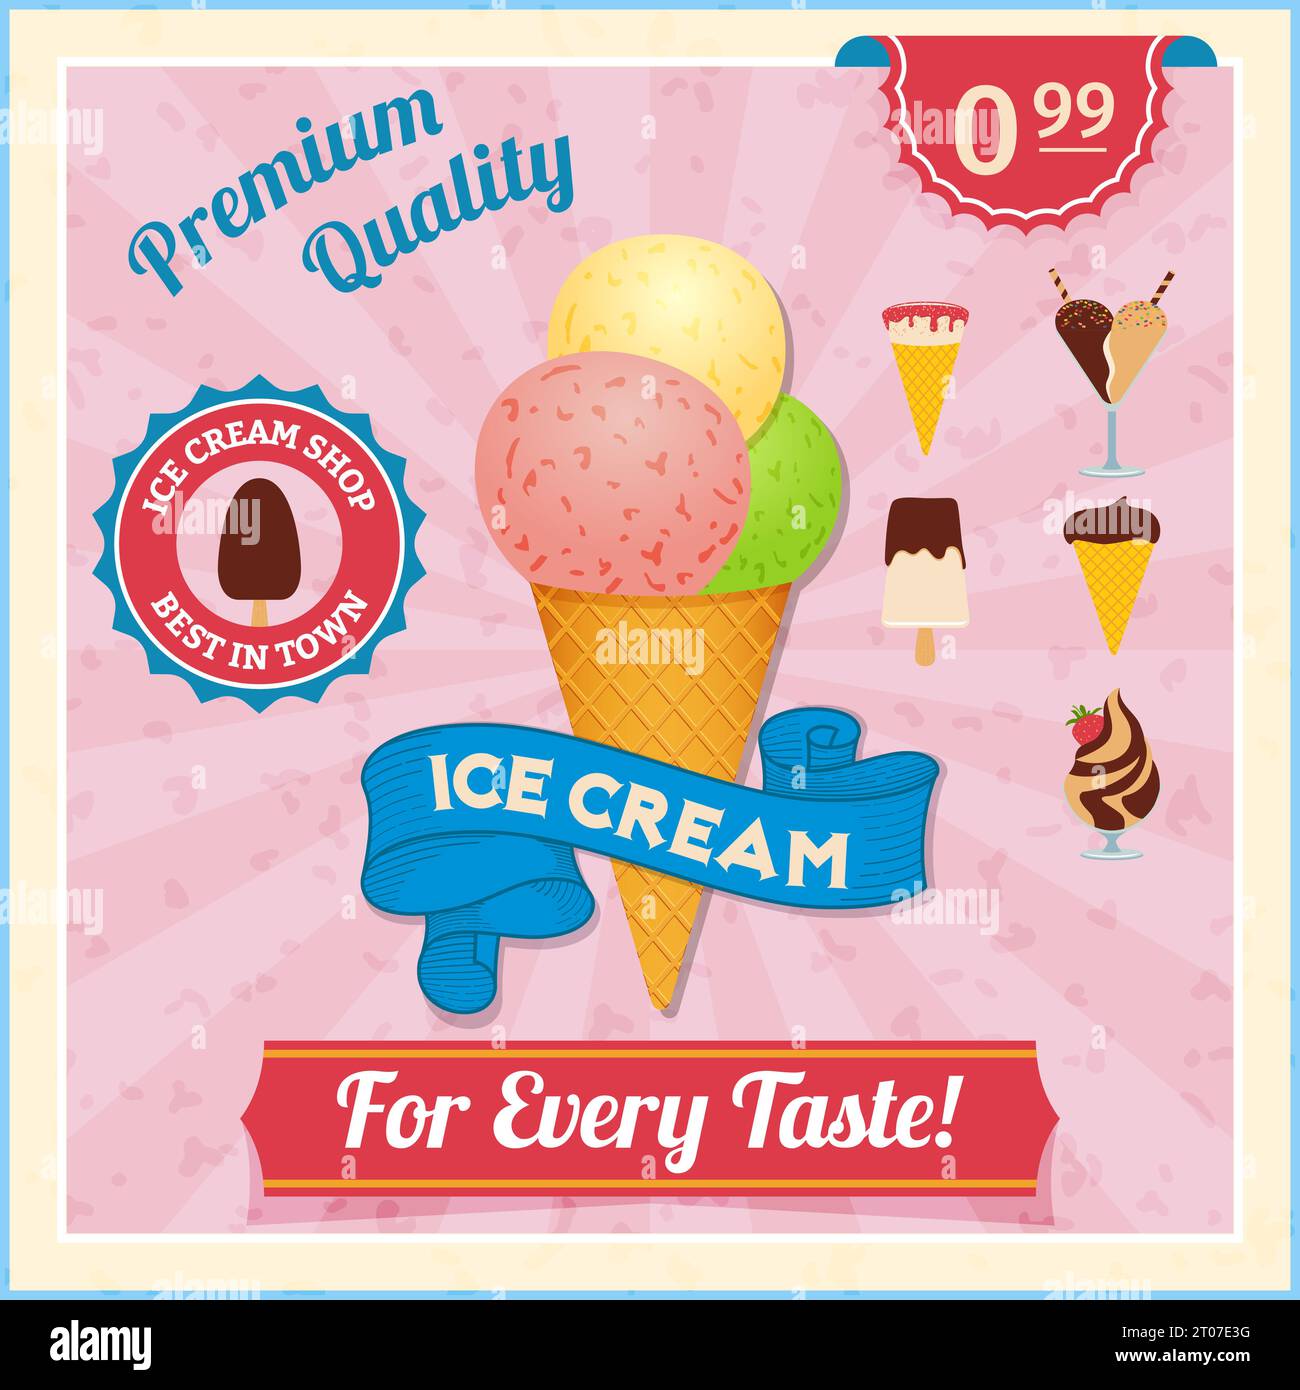 Vintage Ice Cream Sign, Party Decor, Ice Cream Social, Ice Cream Parlour  Party, Creamery, Instant Download, Print Your Own